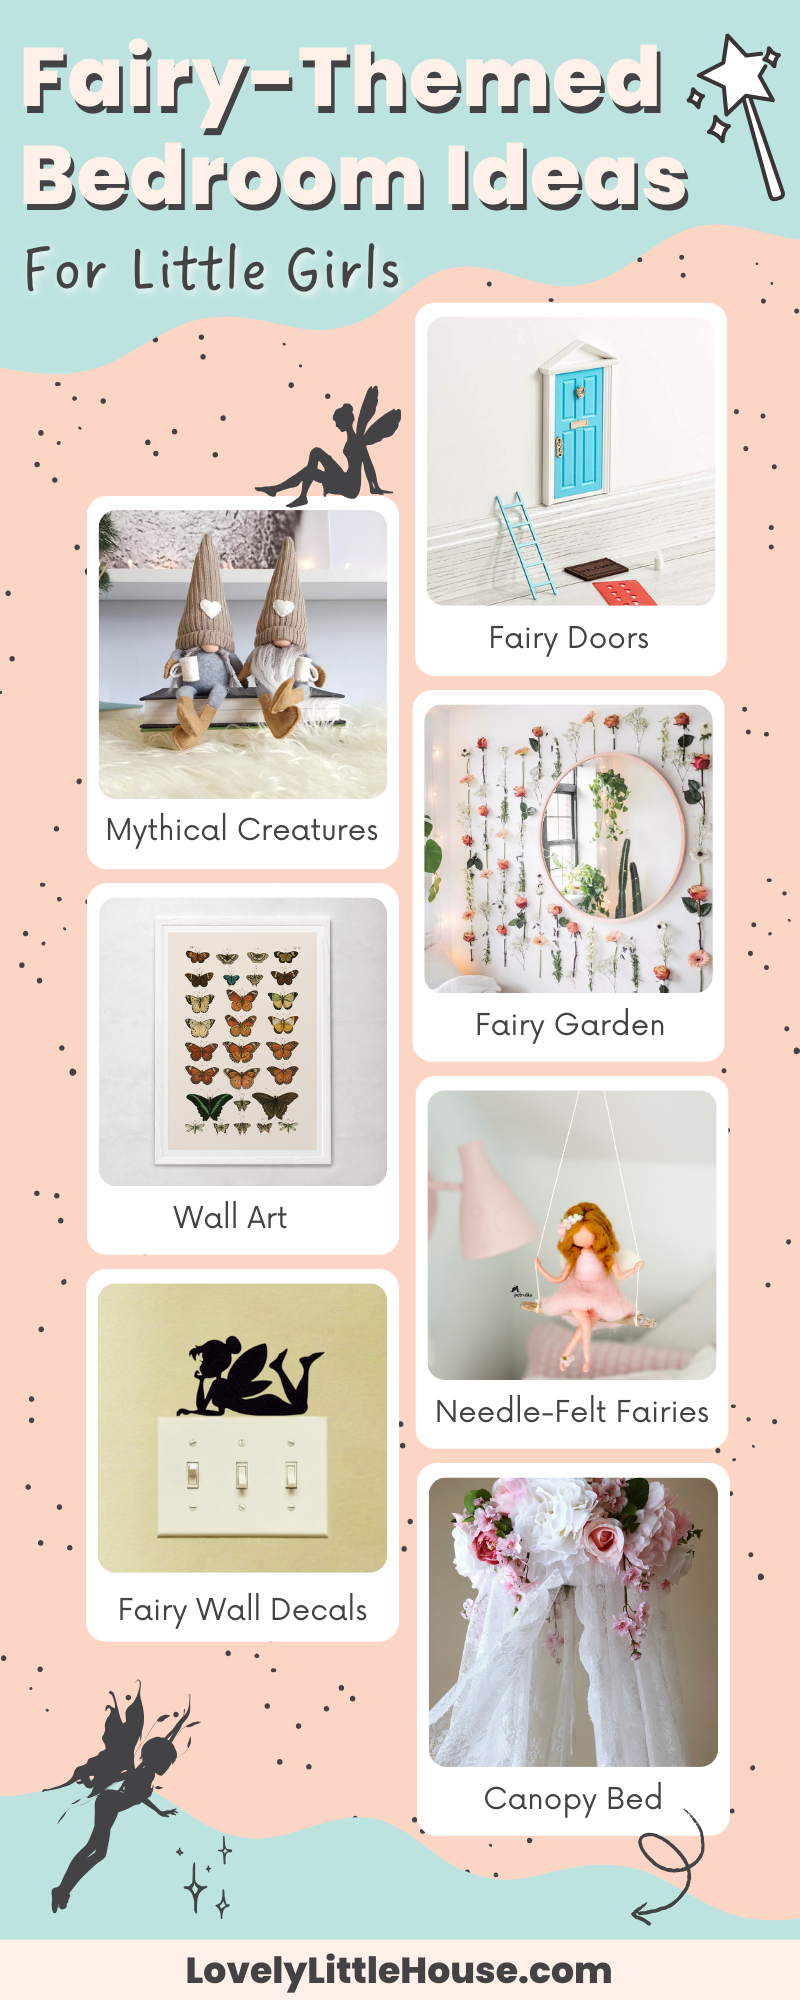 Infographic about fairy themed bedroom ideas for little girls